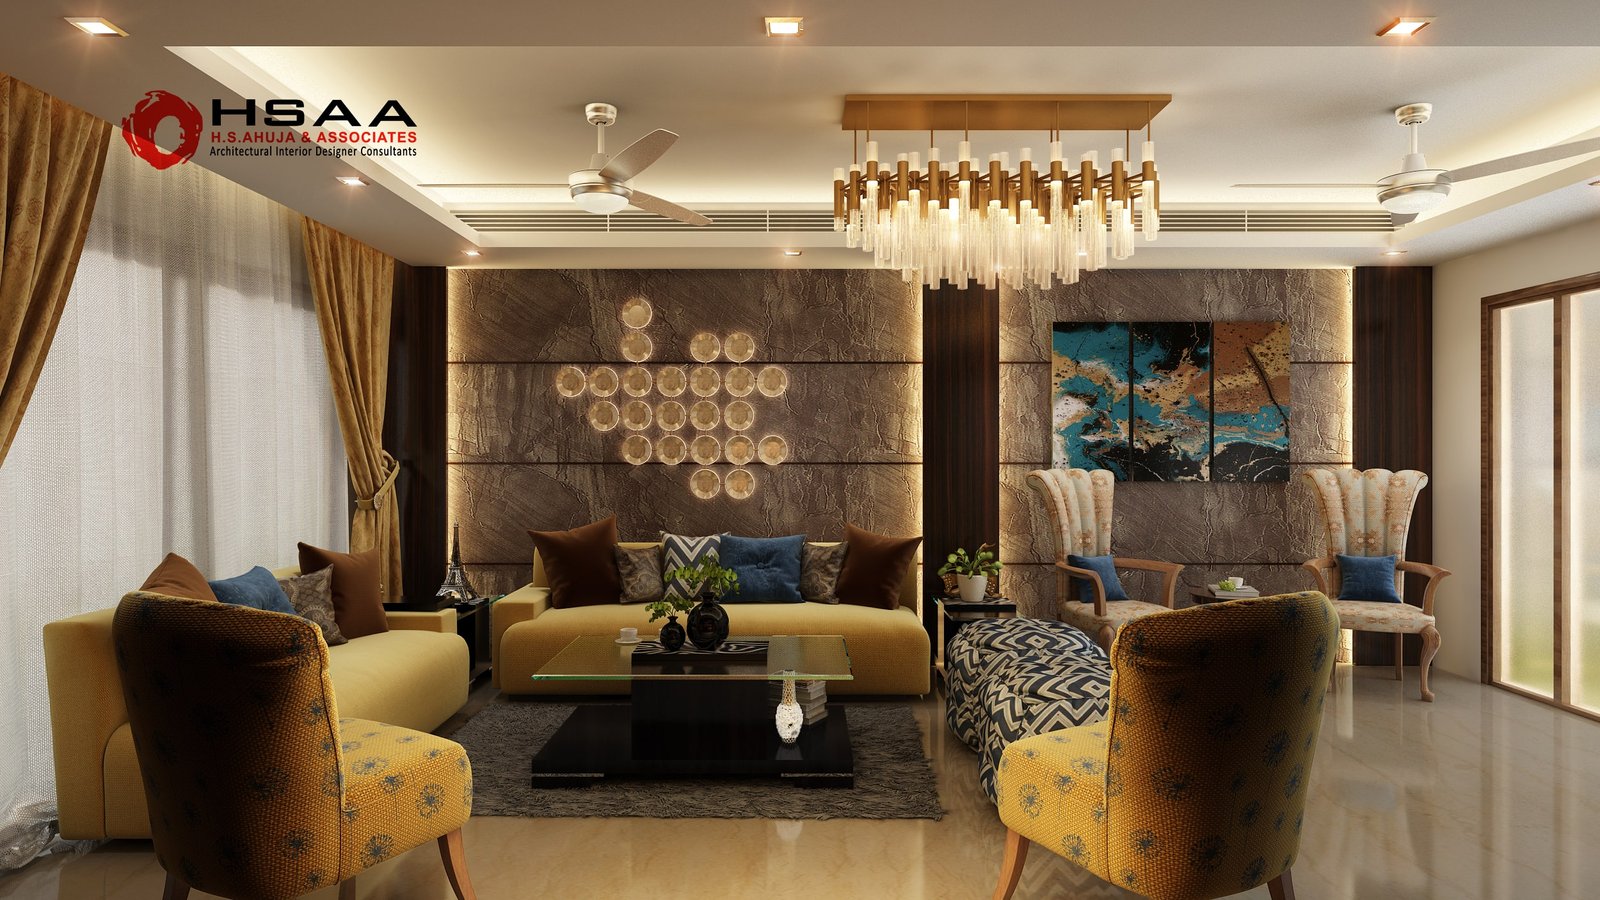 Residence Interior Design by HSAA